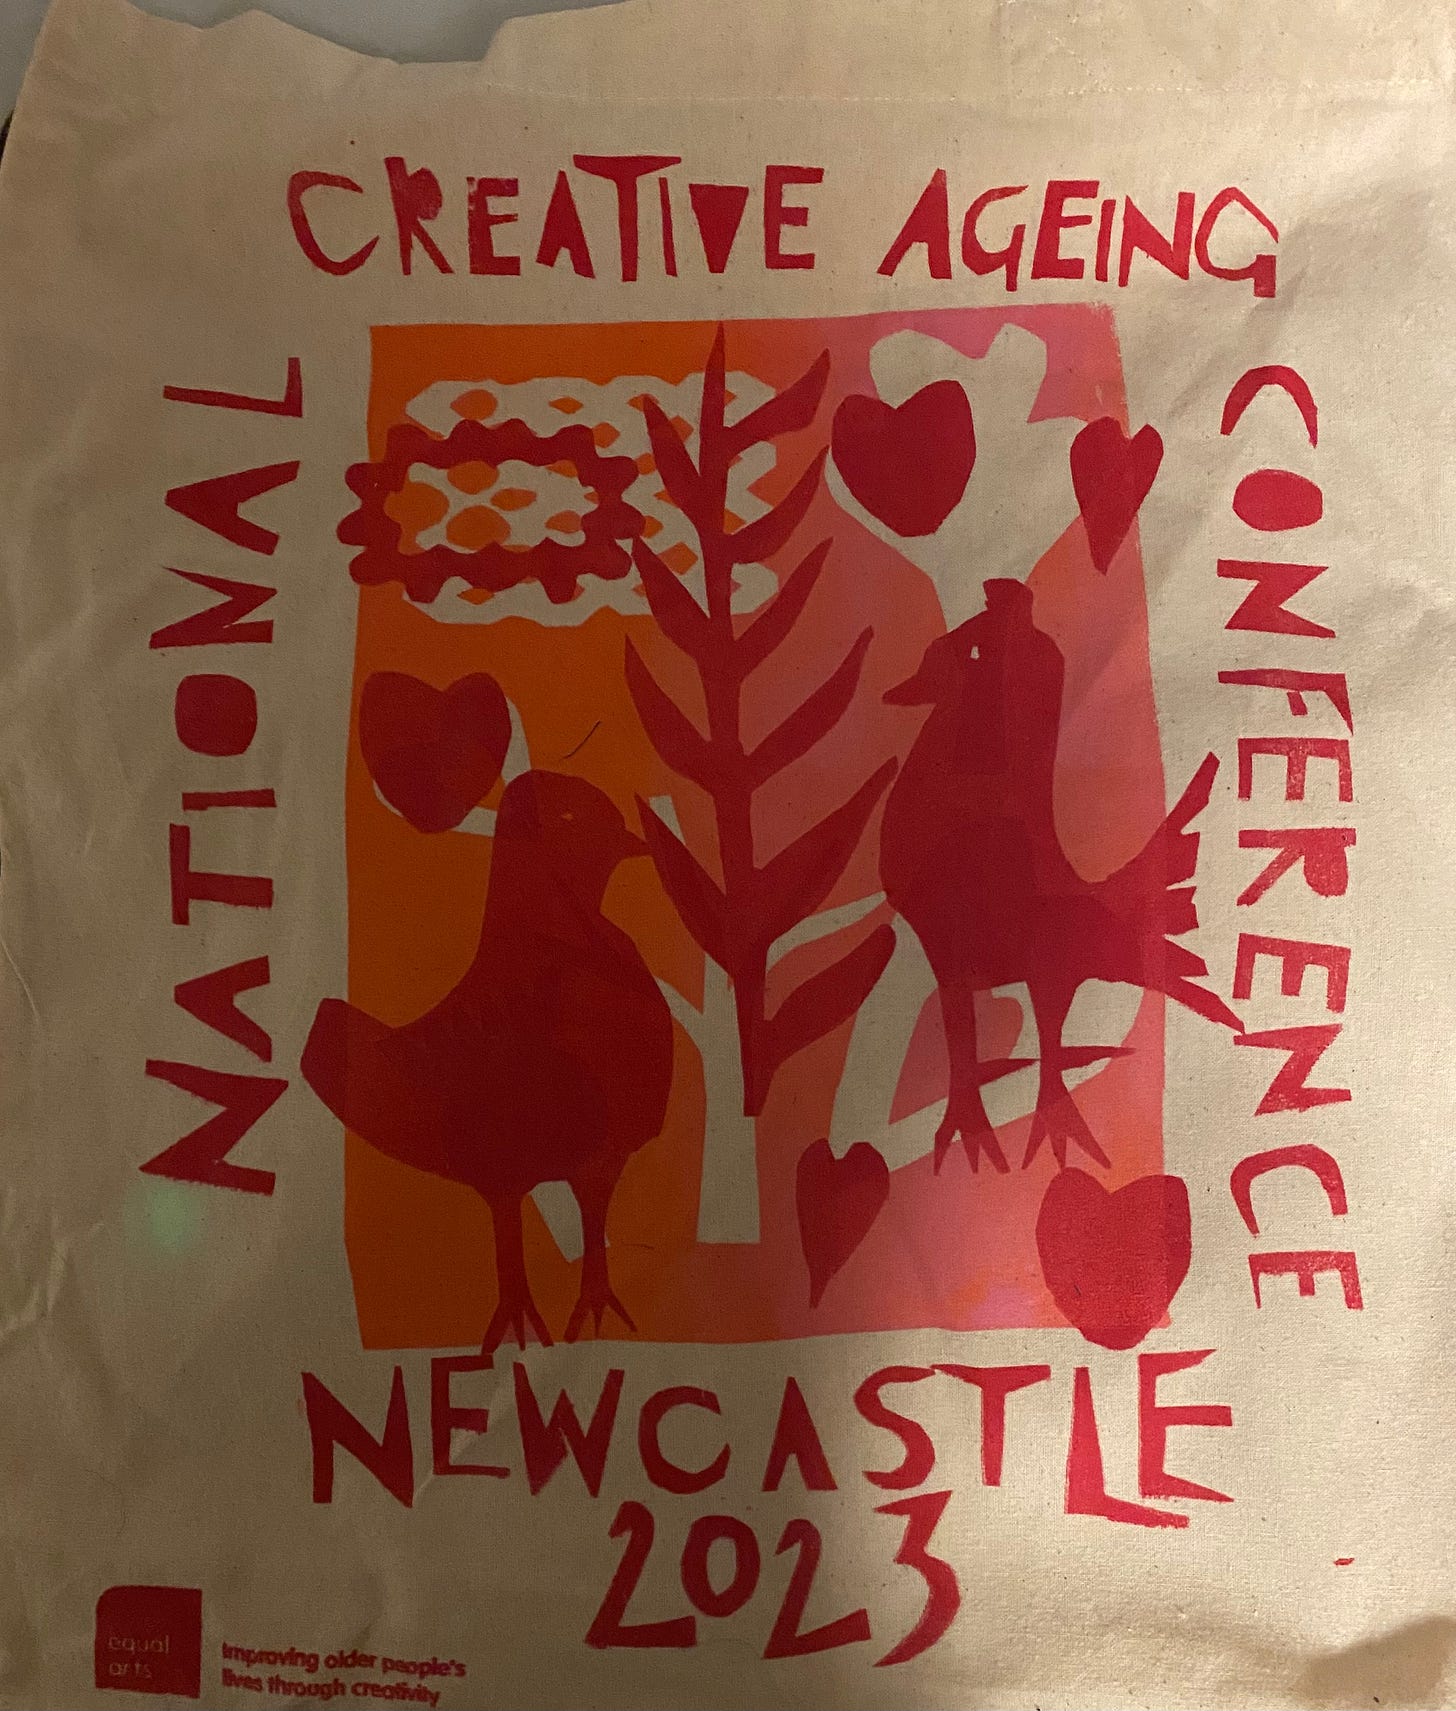 Totebah in red white and orange, woodvutstyle lettering saying Newcastle Creative Aging Conference Newcastle 2023, pictures of birds, hearts and trees